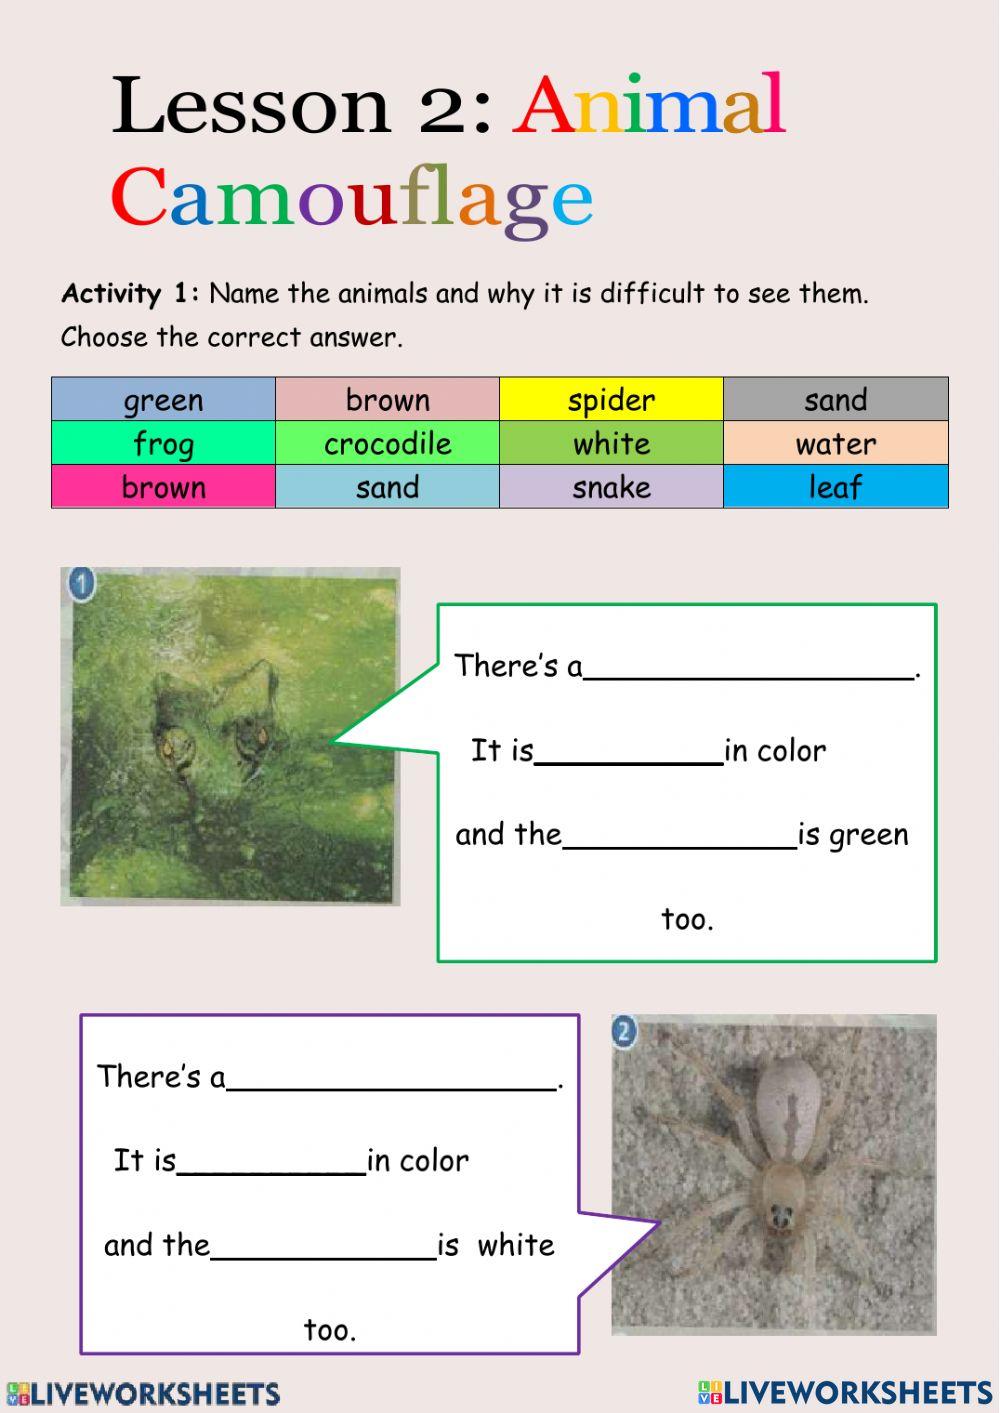 Animal camouflage online exercise | Live Worksheets